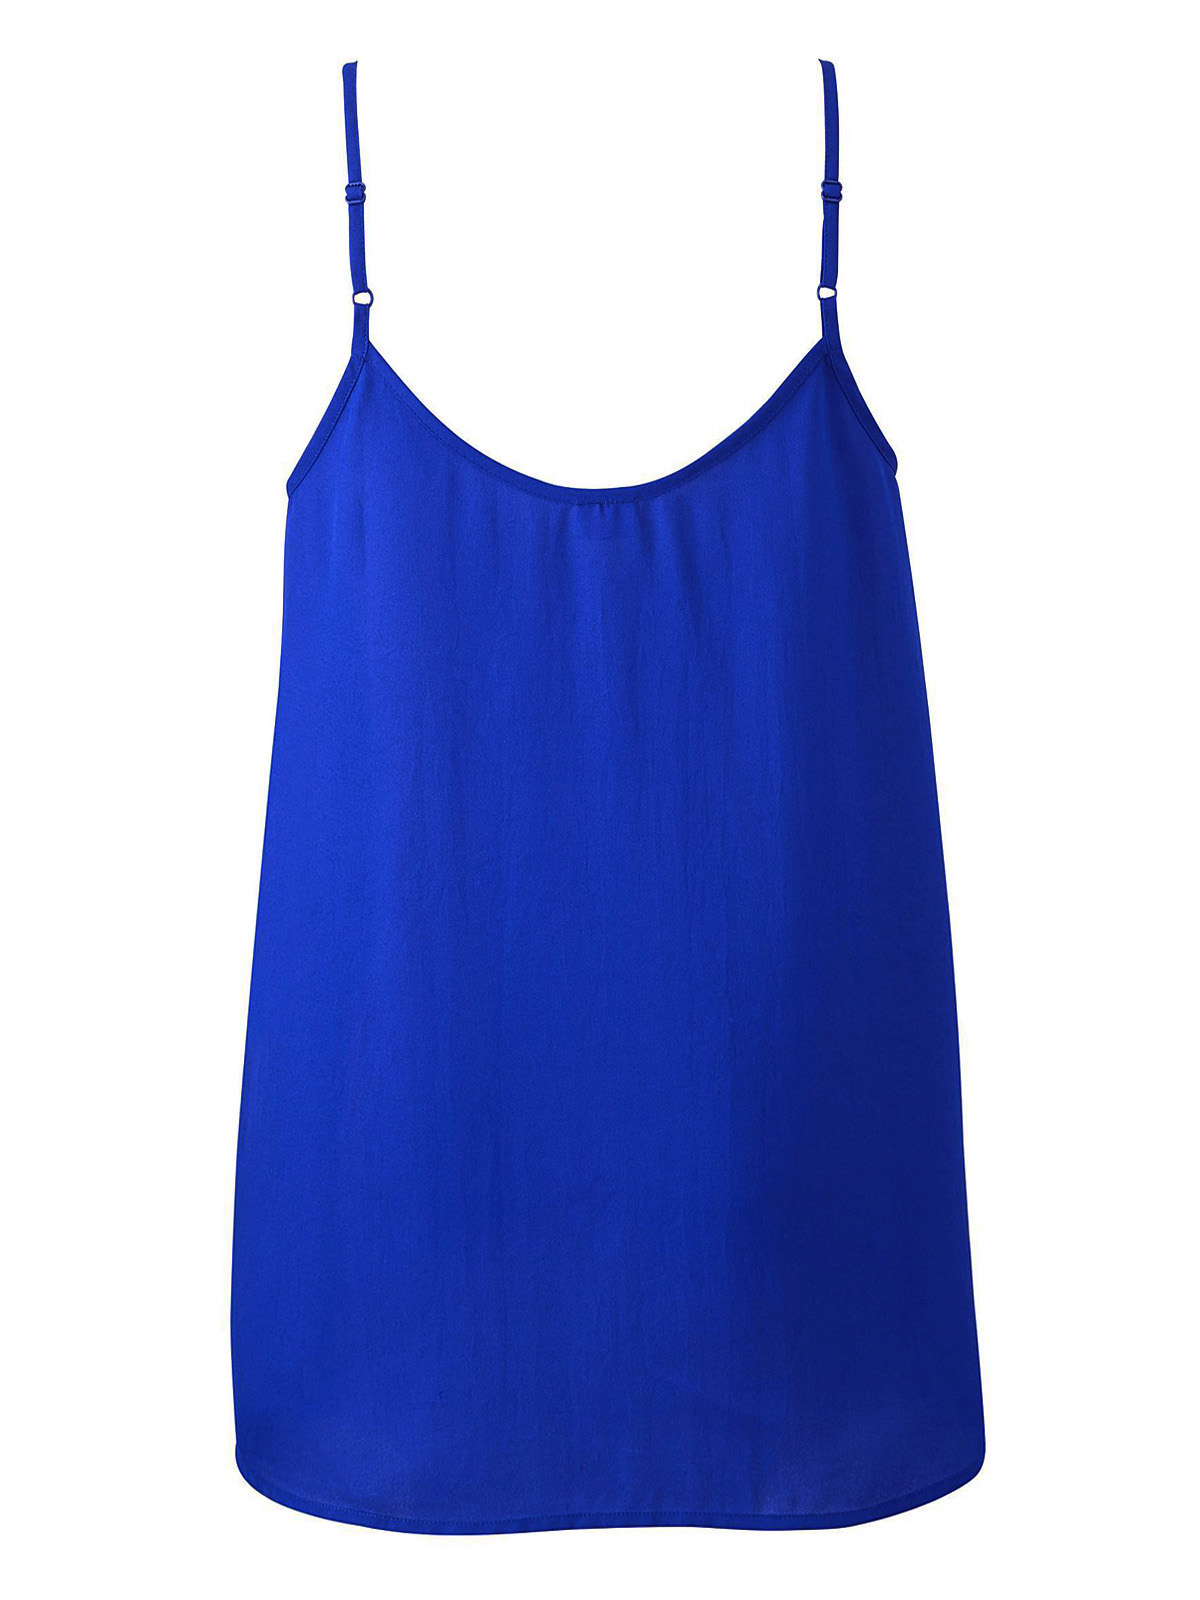 Capsule - - Capsule BRIGHT-BLUE Pleat Front Strappy Cami Top - Size 10 ...